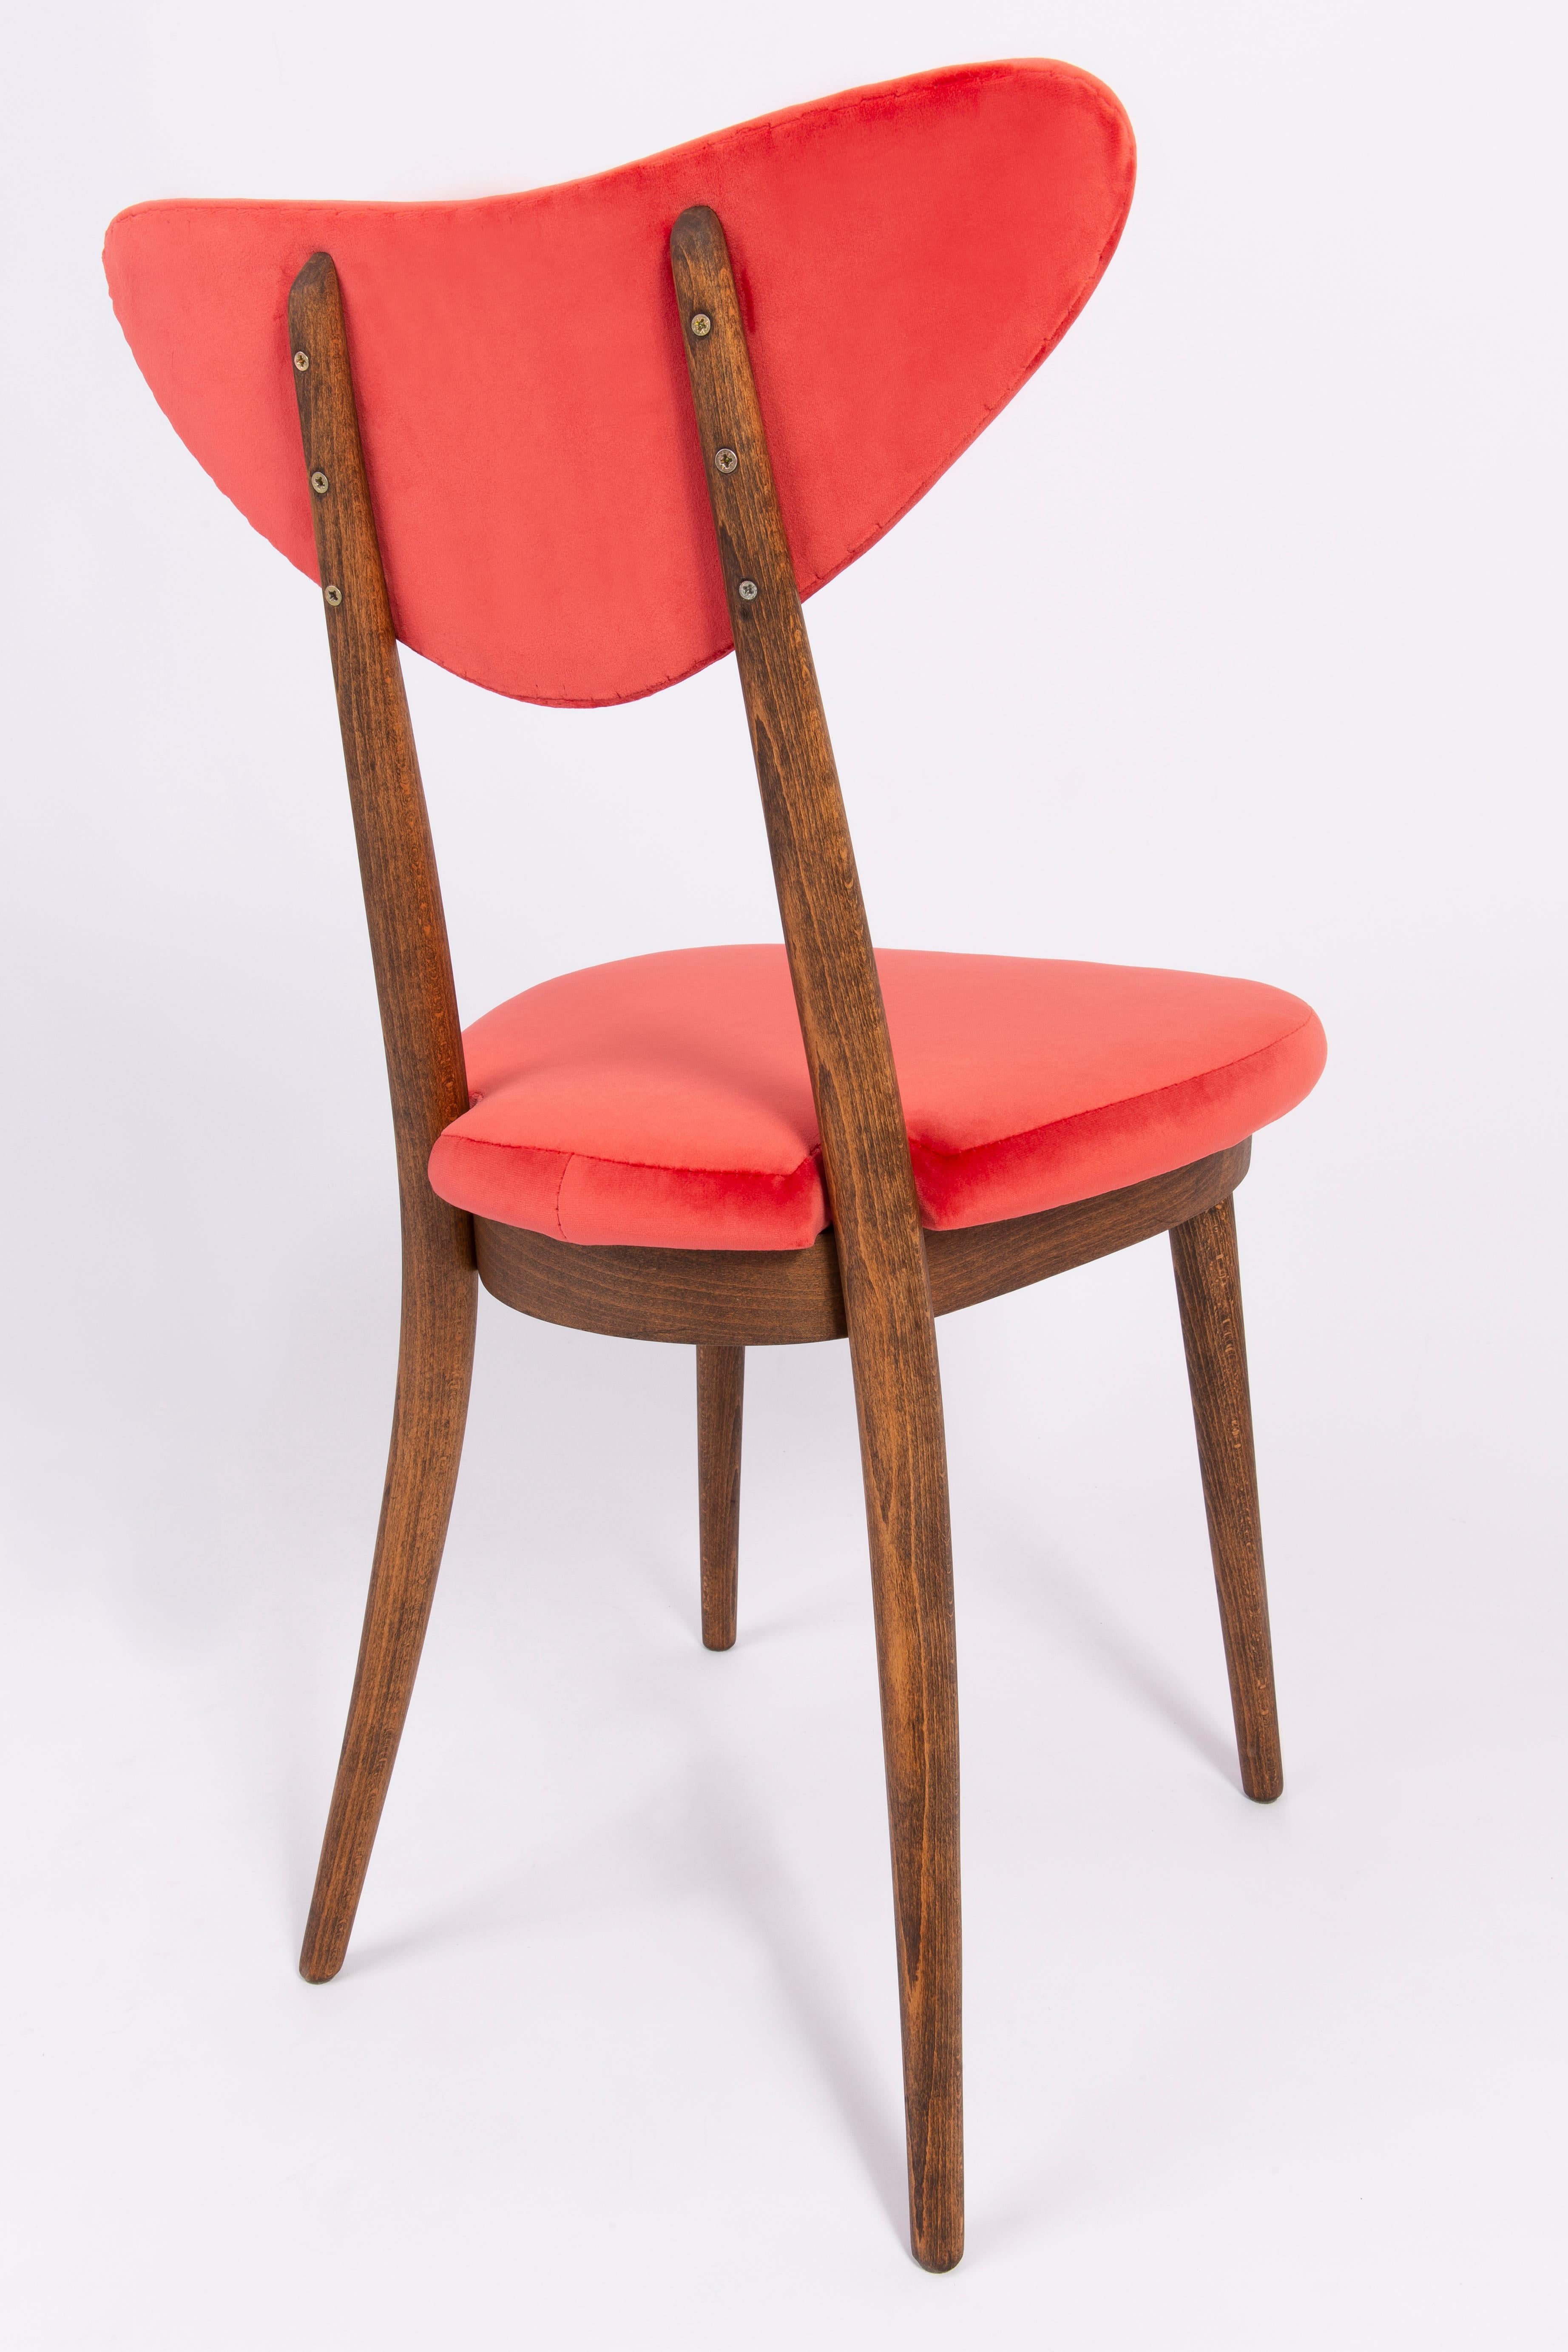 Set of Four Red Heart Chairs, Poland, 1960s For Sale 4